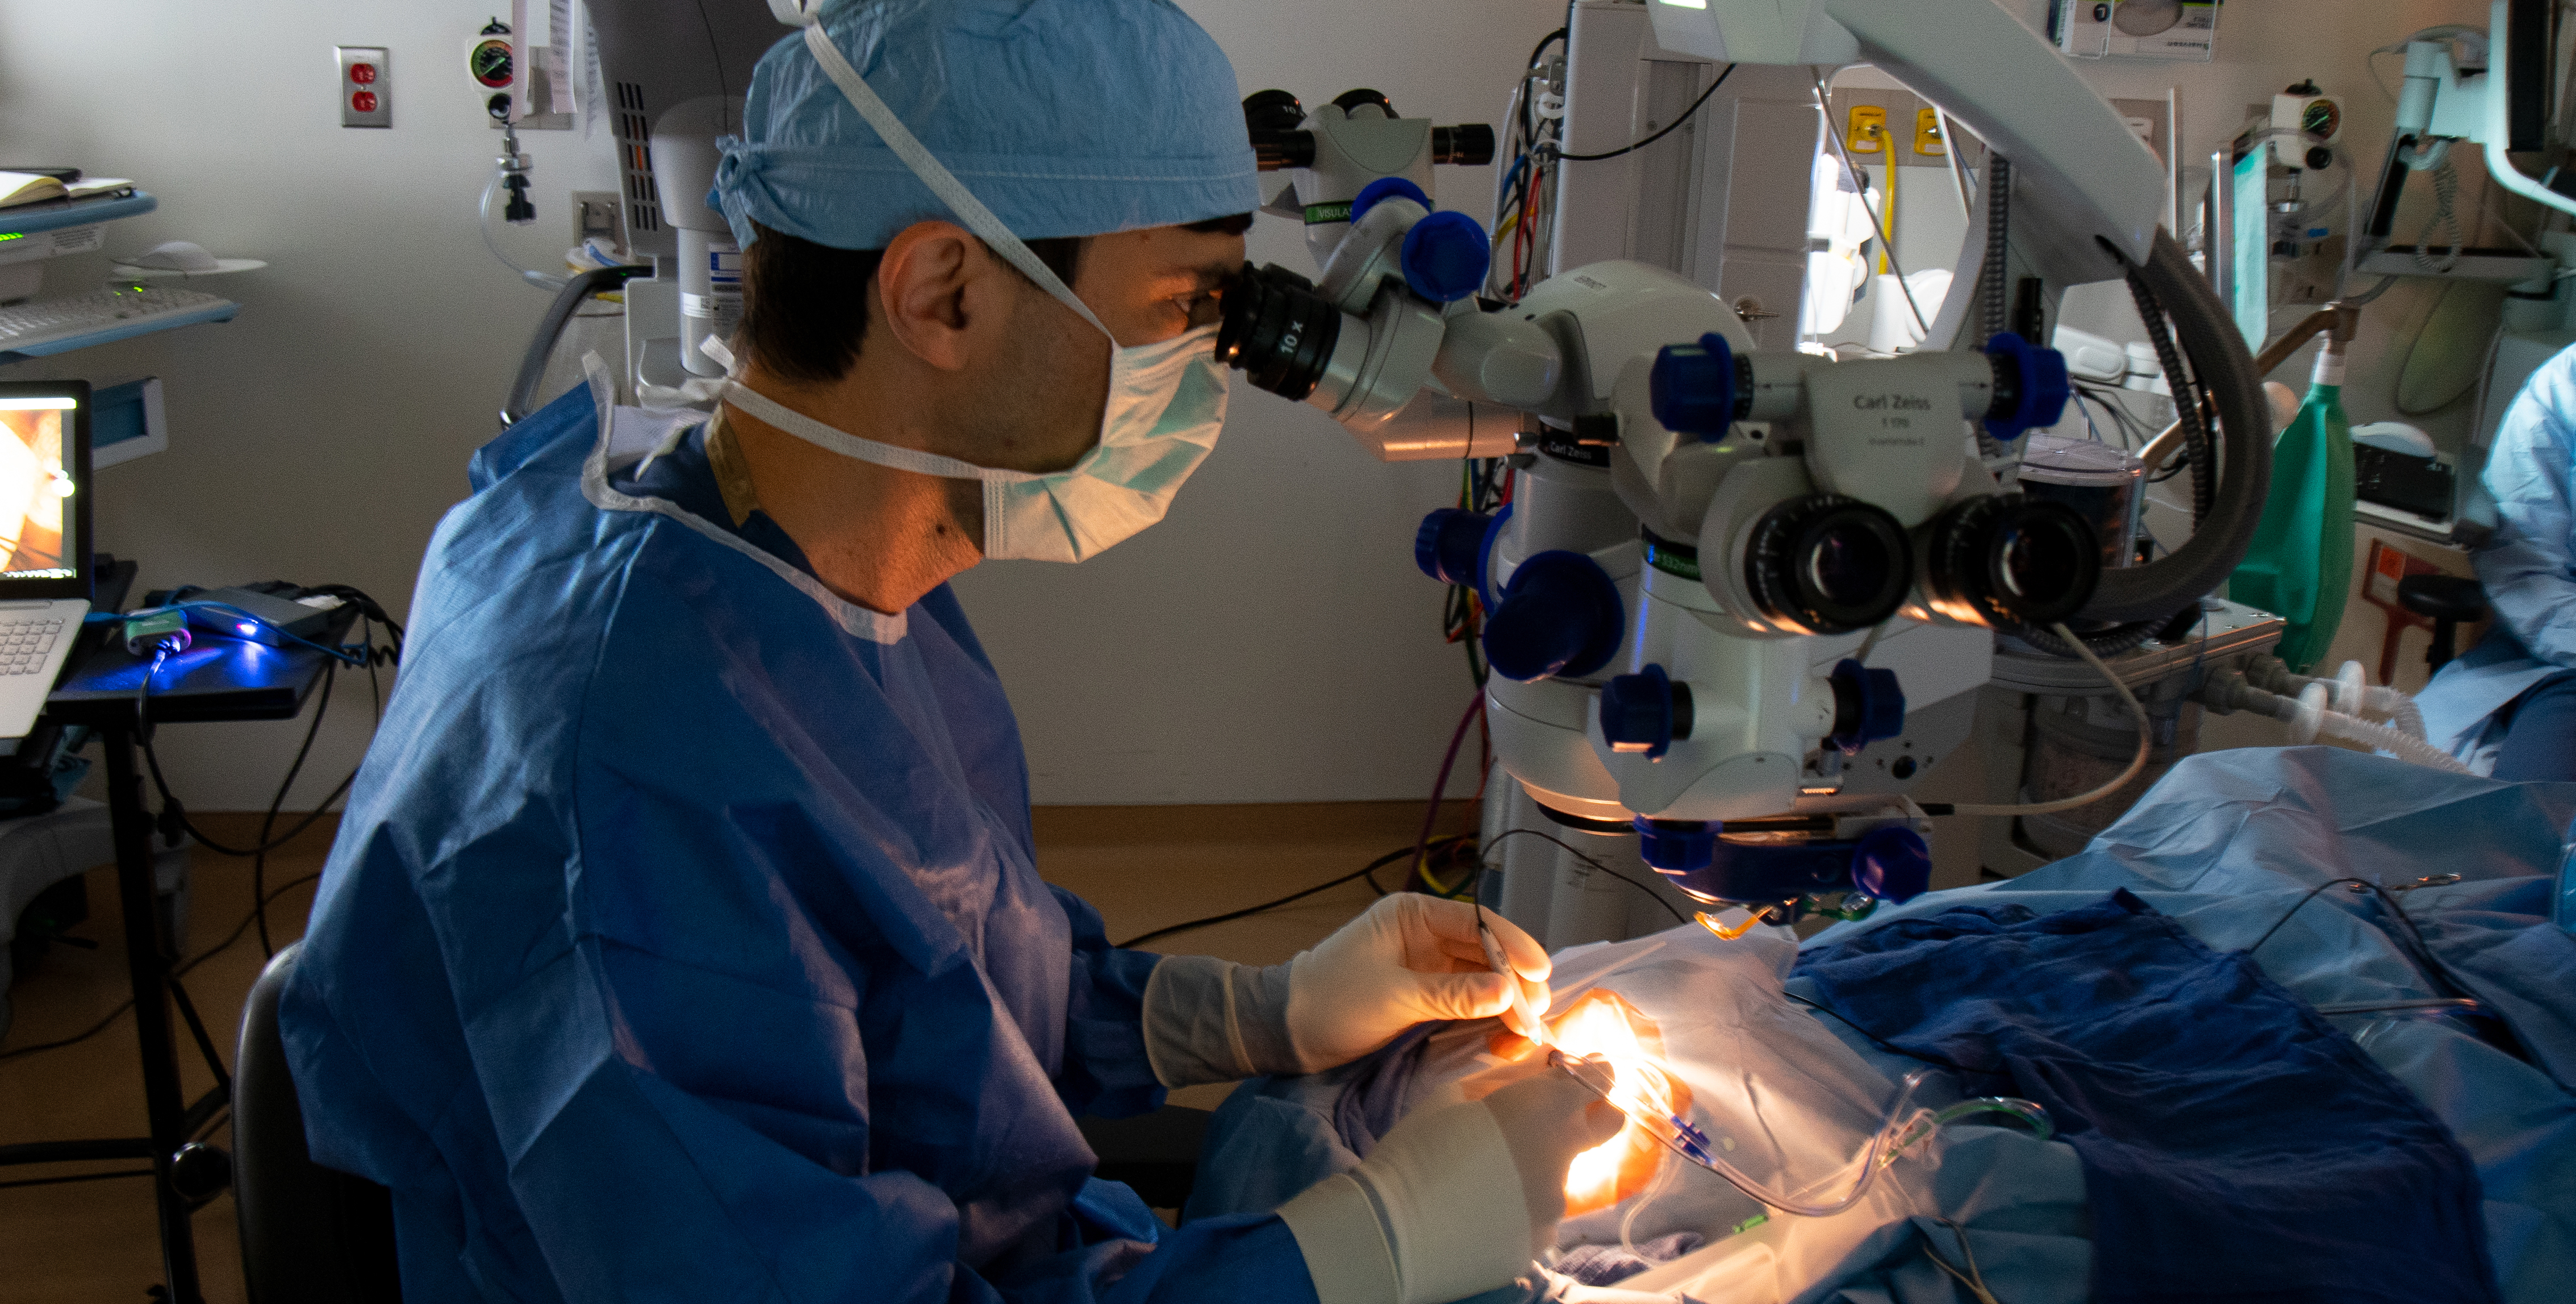 Wearing tanslucent white gloves and a blue cap, mask, and medical garb, a surgreon manipulates several objects connected to wires and tubes above the patient's eye. The patient's face is invisible in the intense glow of the operating lights.